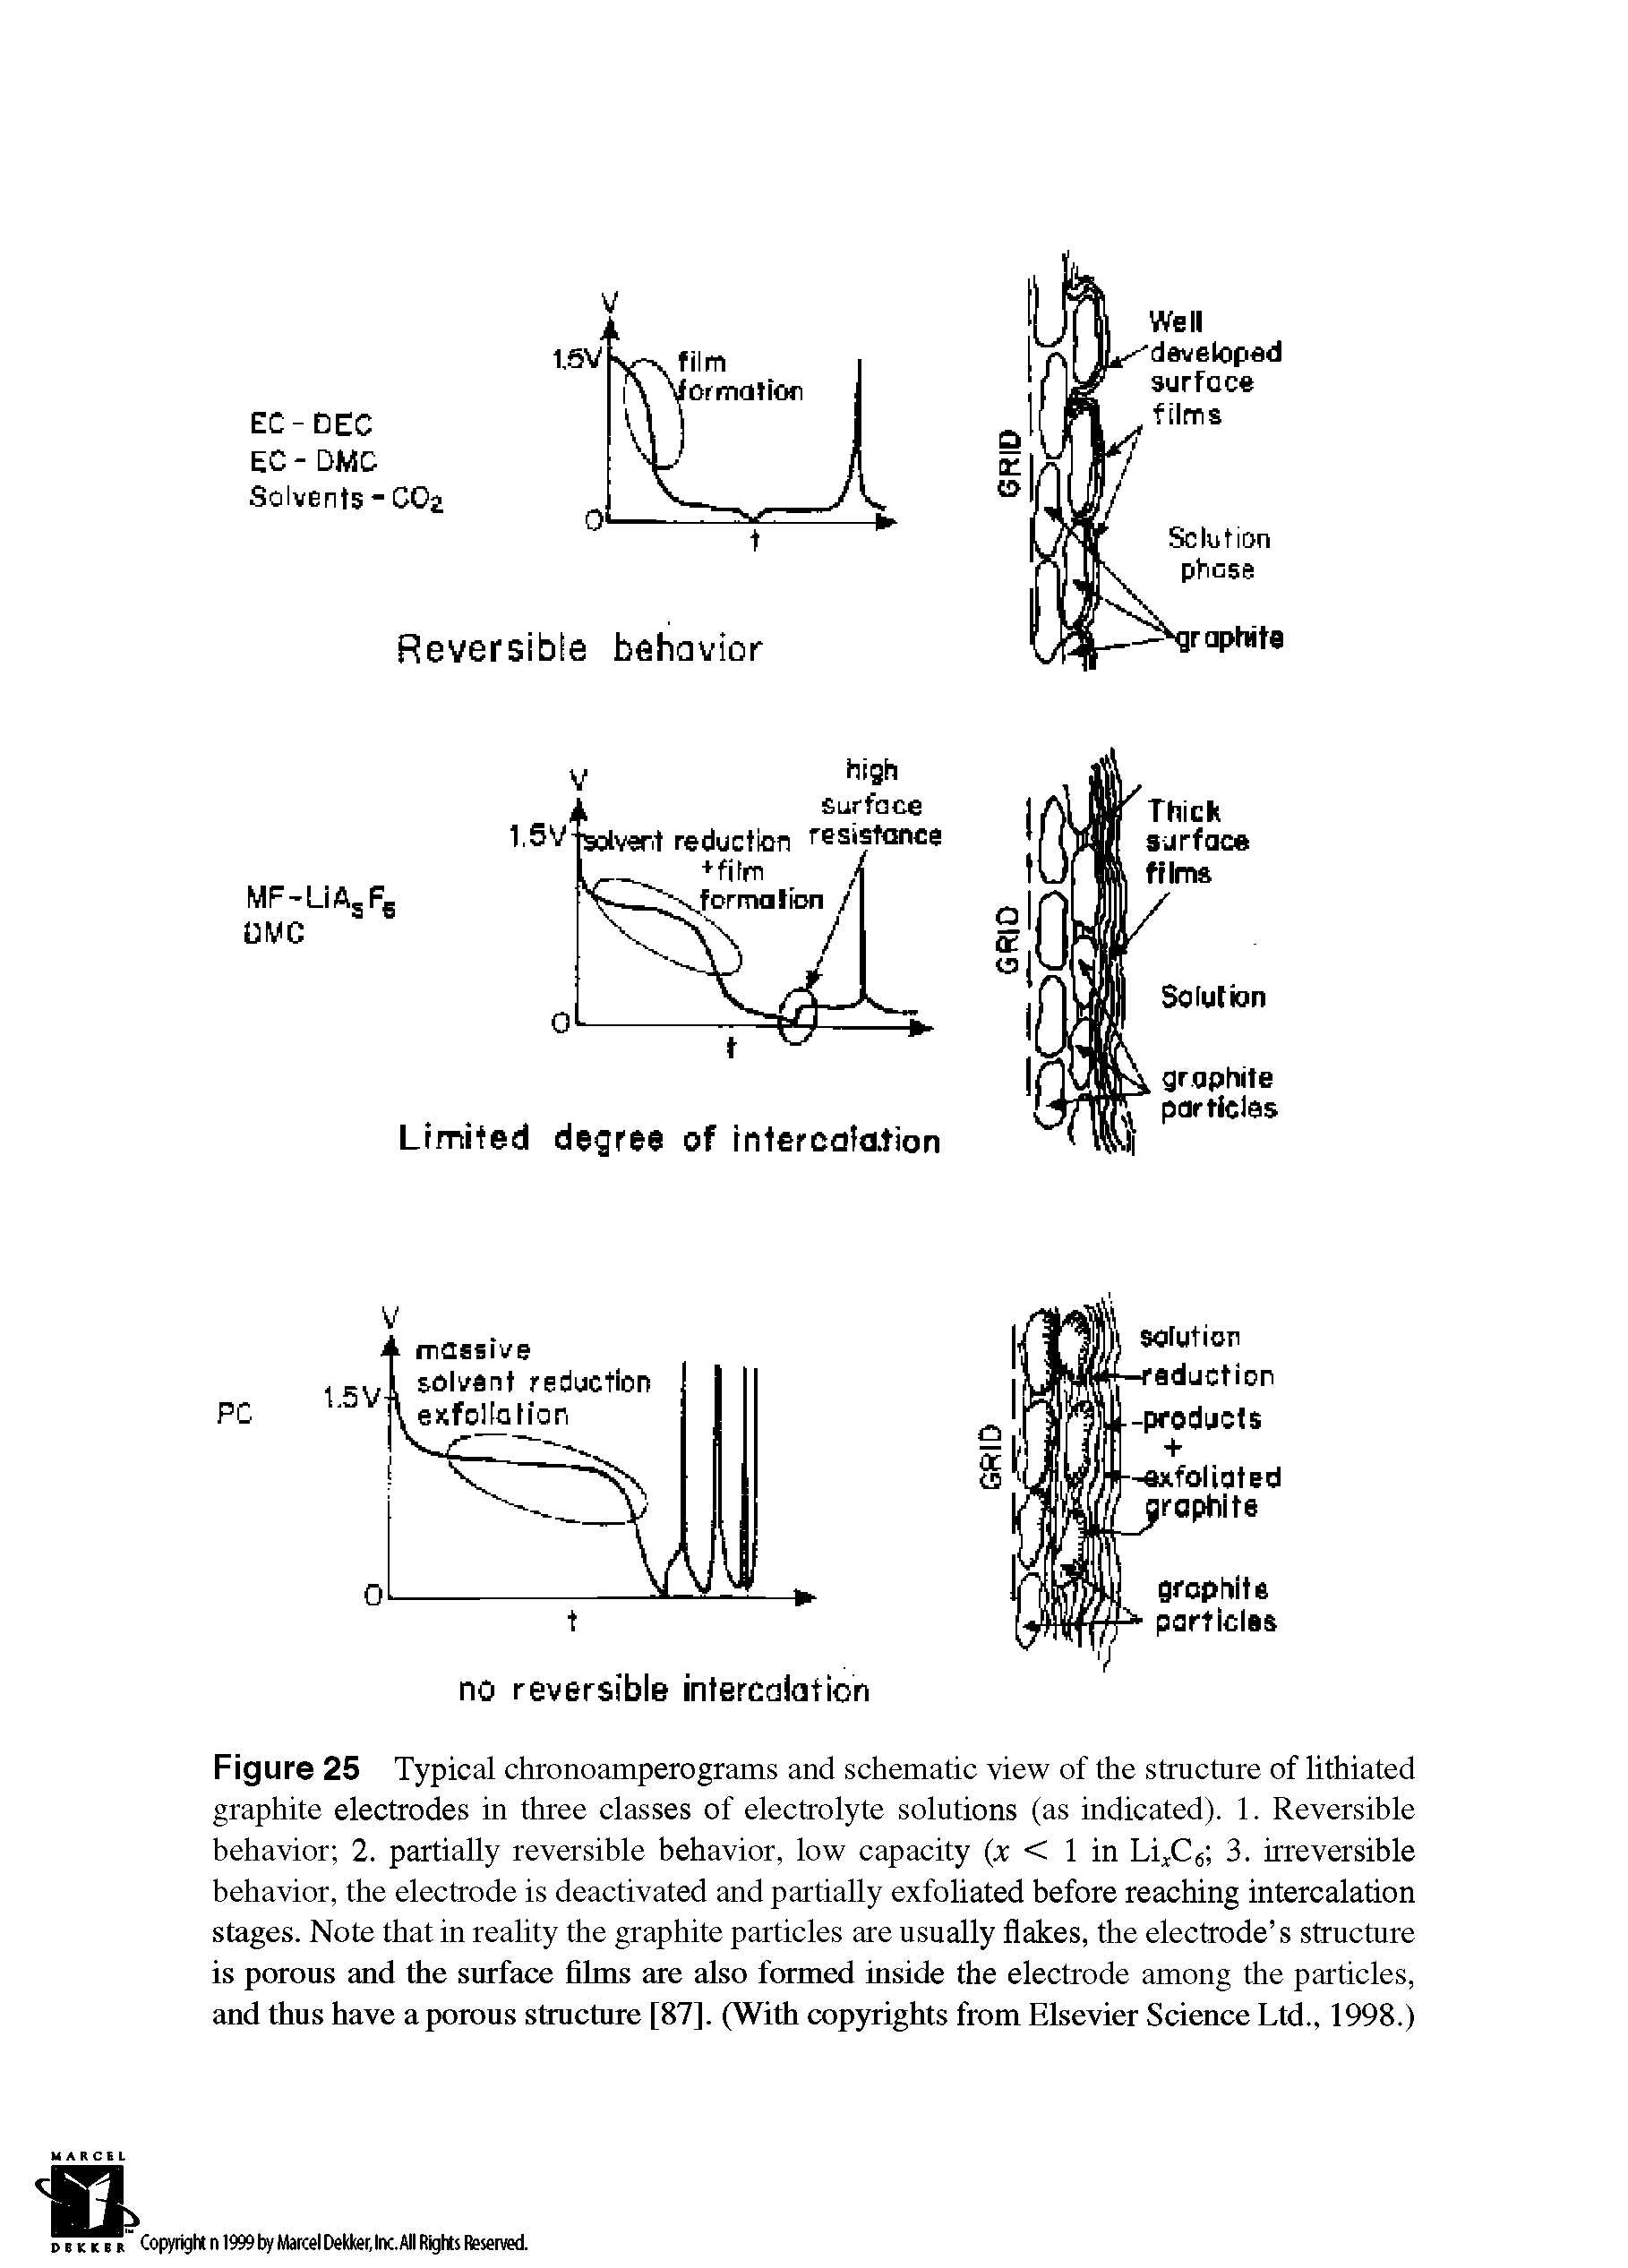 Figure 25 Typical chronoamperograms and schematic view of the structure of lithiated graphite electrodes in three classes of electrolyte solutions (as indicated). 1. Reversible behavior 2. partially reversible behavior, low capacity (x < 1 in LijC6 3. irreversible behavior, the electrode is deactivated and partially exfoliated before reaching intercalation stages. Note that in reality the graphite particles are usually flakes, the electrode s structure is porous and the surface films are also formed inside the electrode among the particles, and thus have aporous structure [87]. (With copyrights from Elsevier Science Ltd., 1998.)...